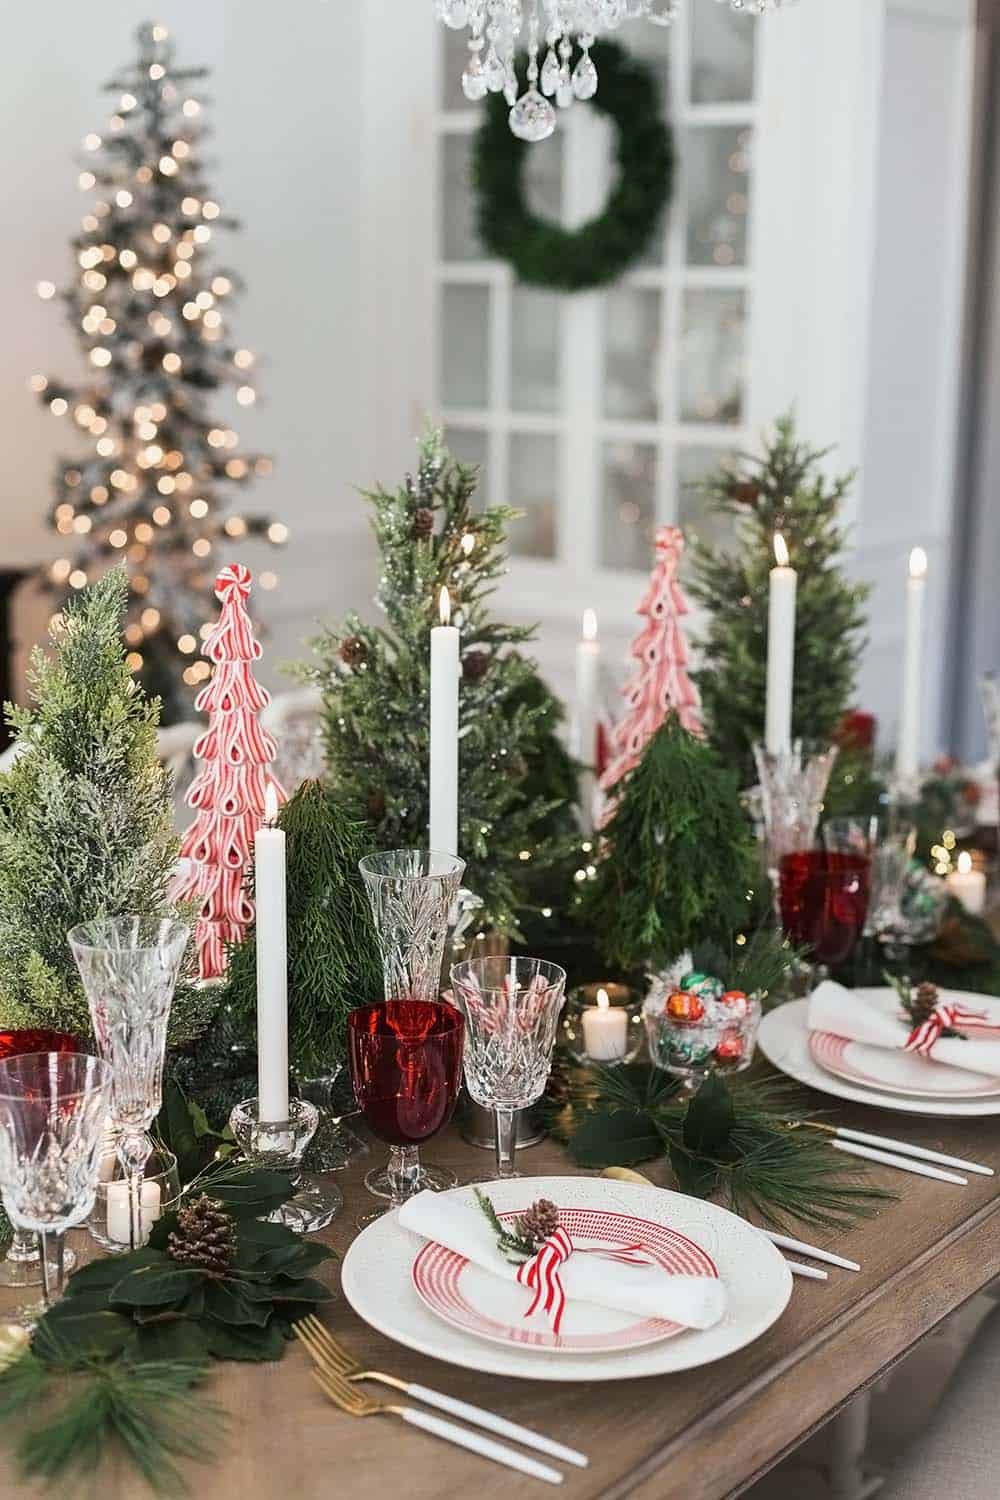 SET OF 2 Christmas Party Decorations Christmas Tree Centerpiece with Bows